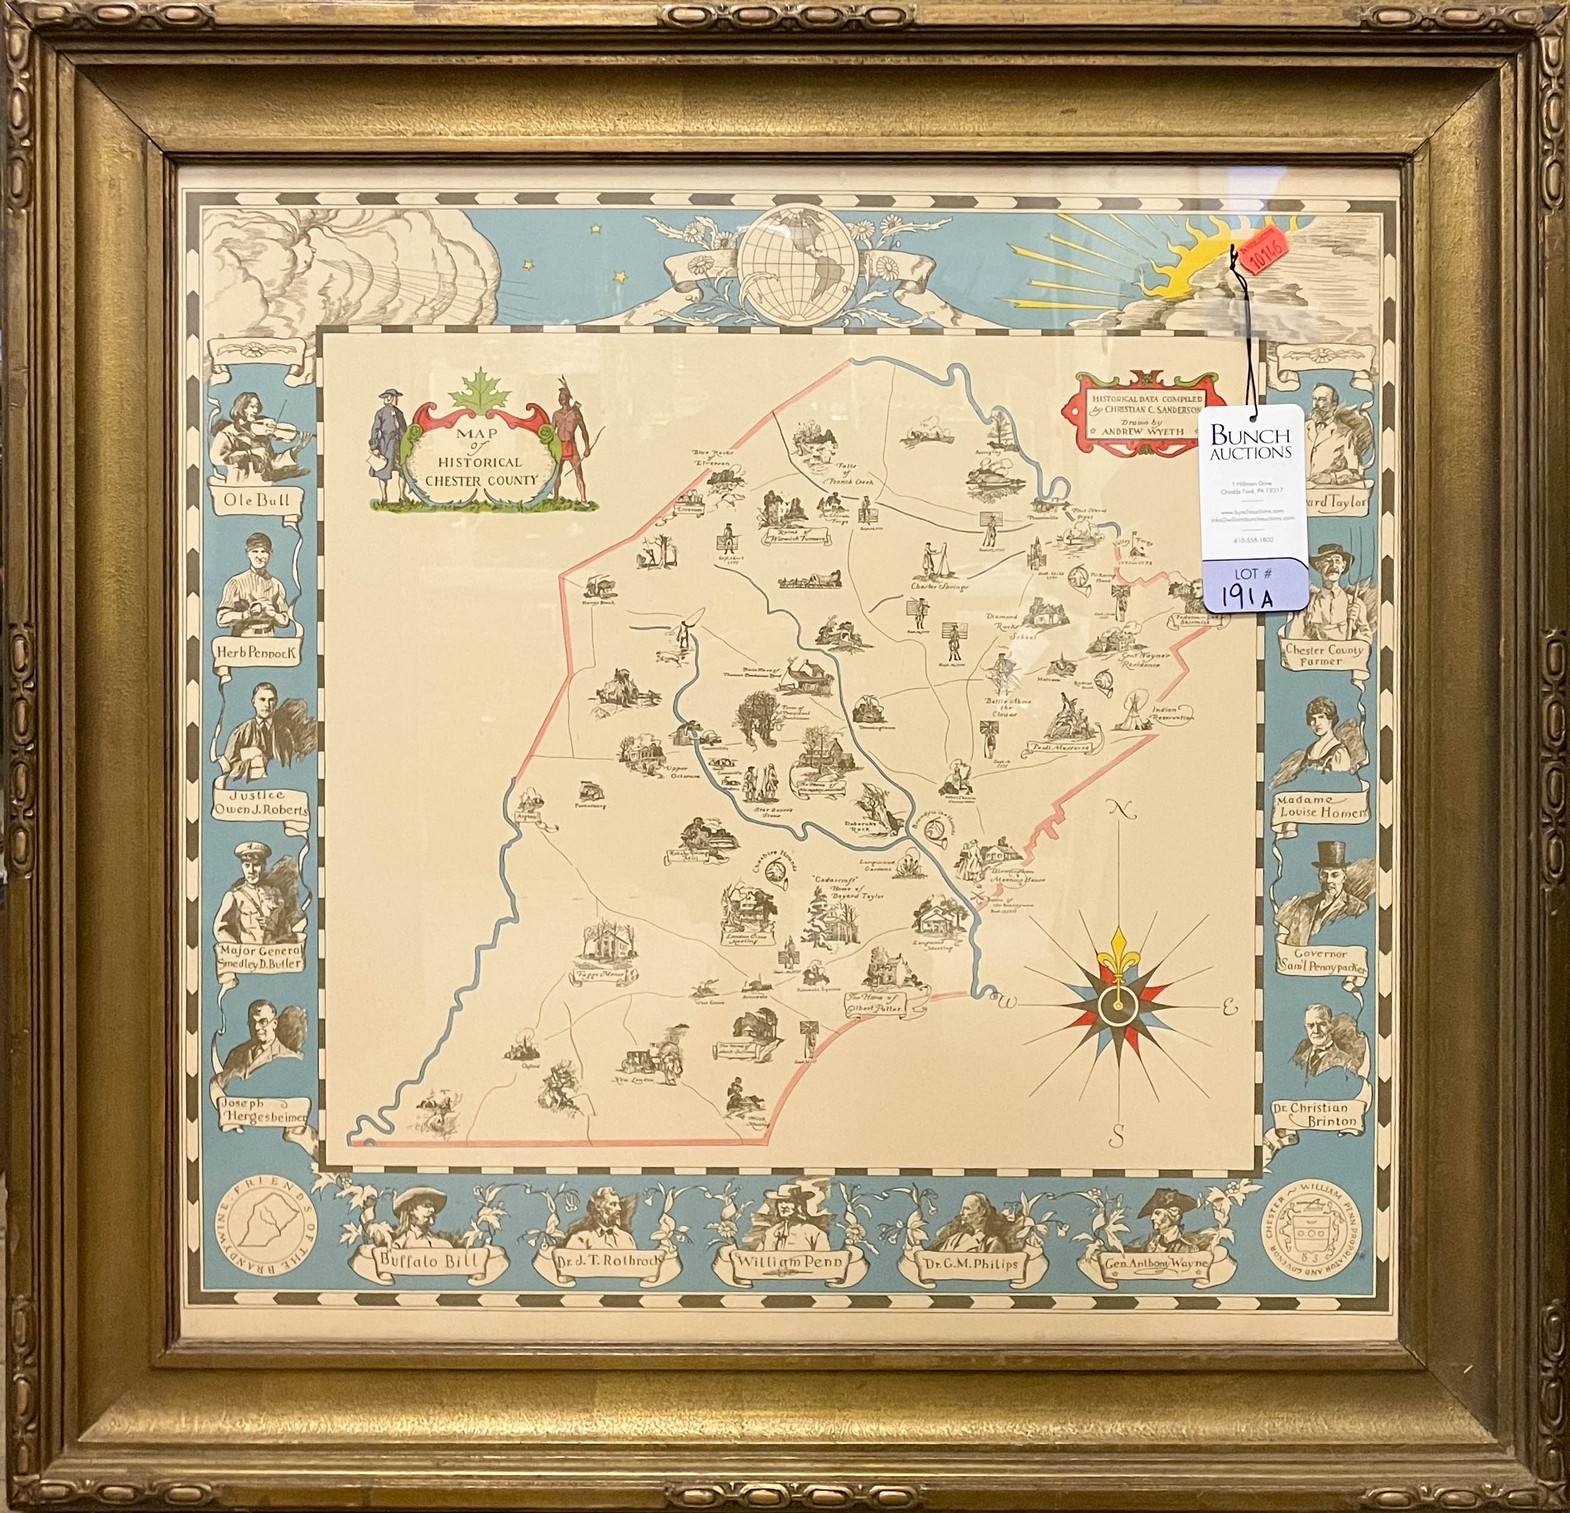 A framed map of historical Chester